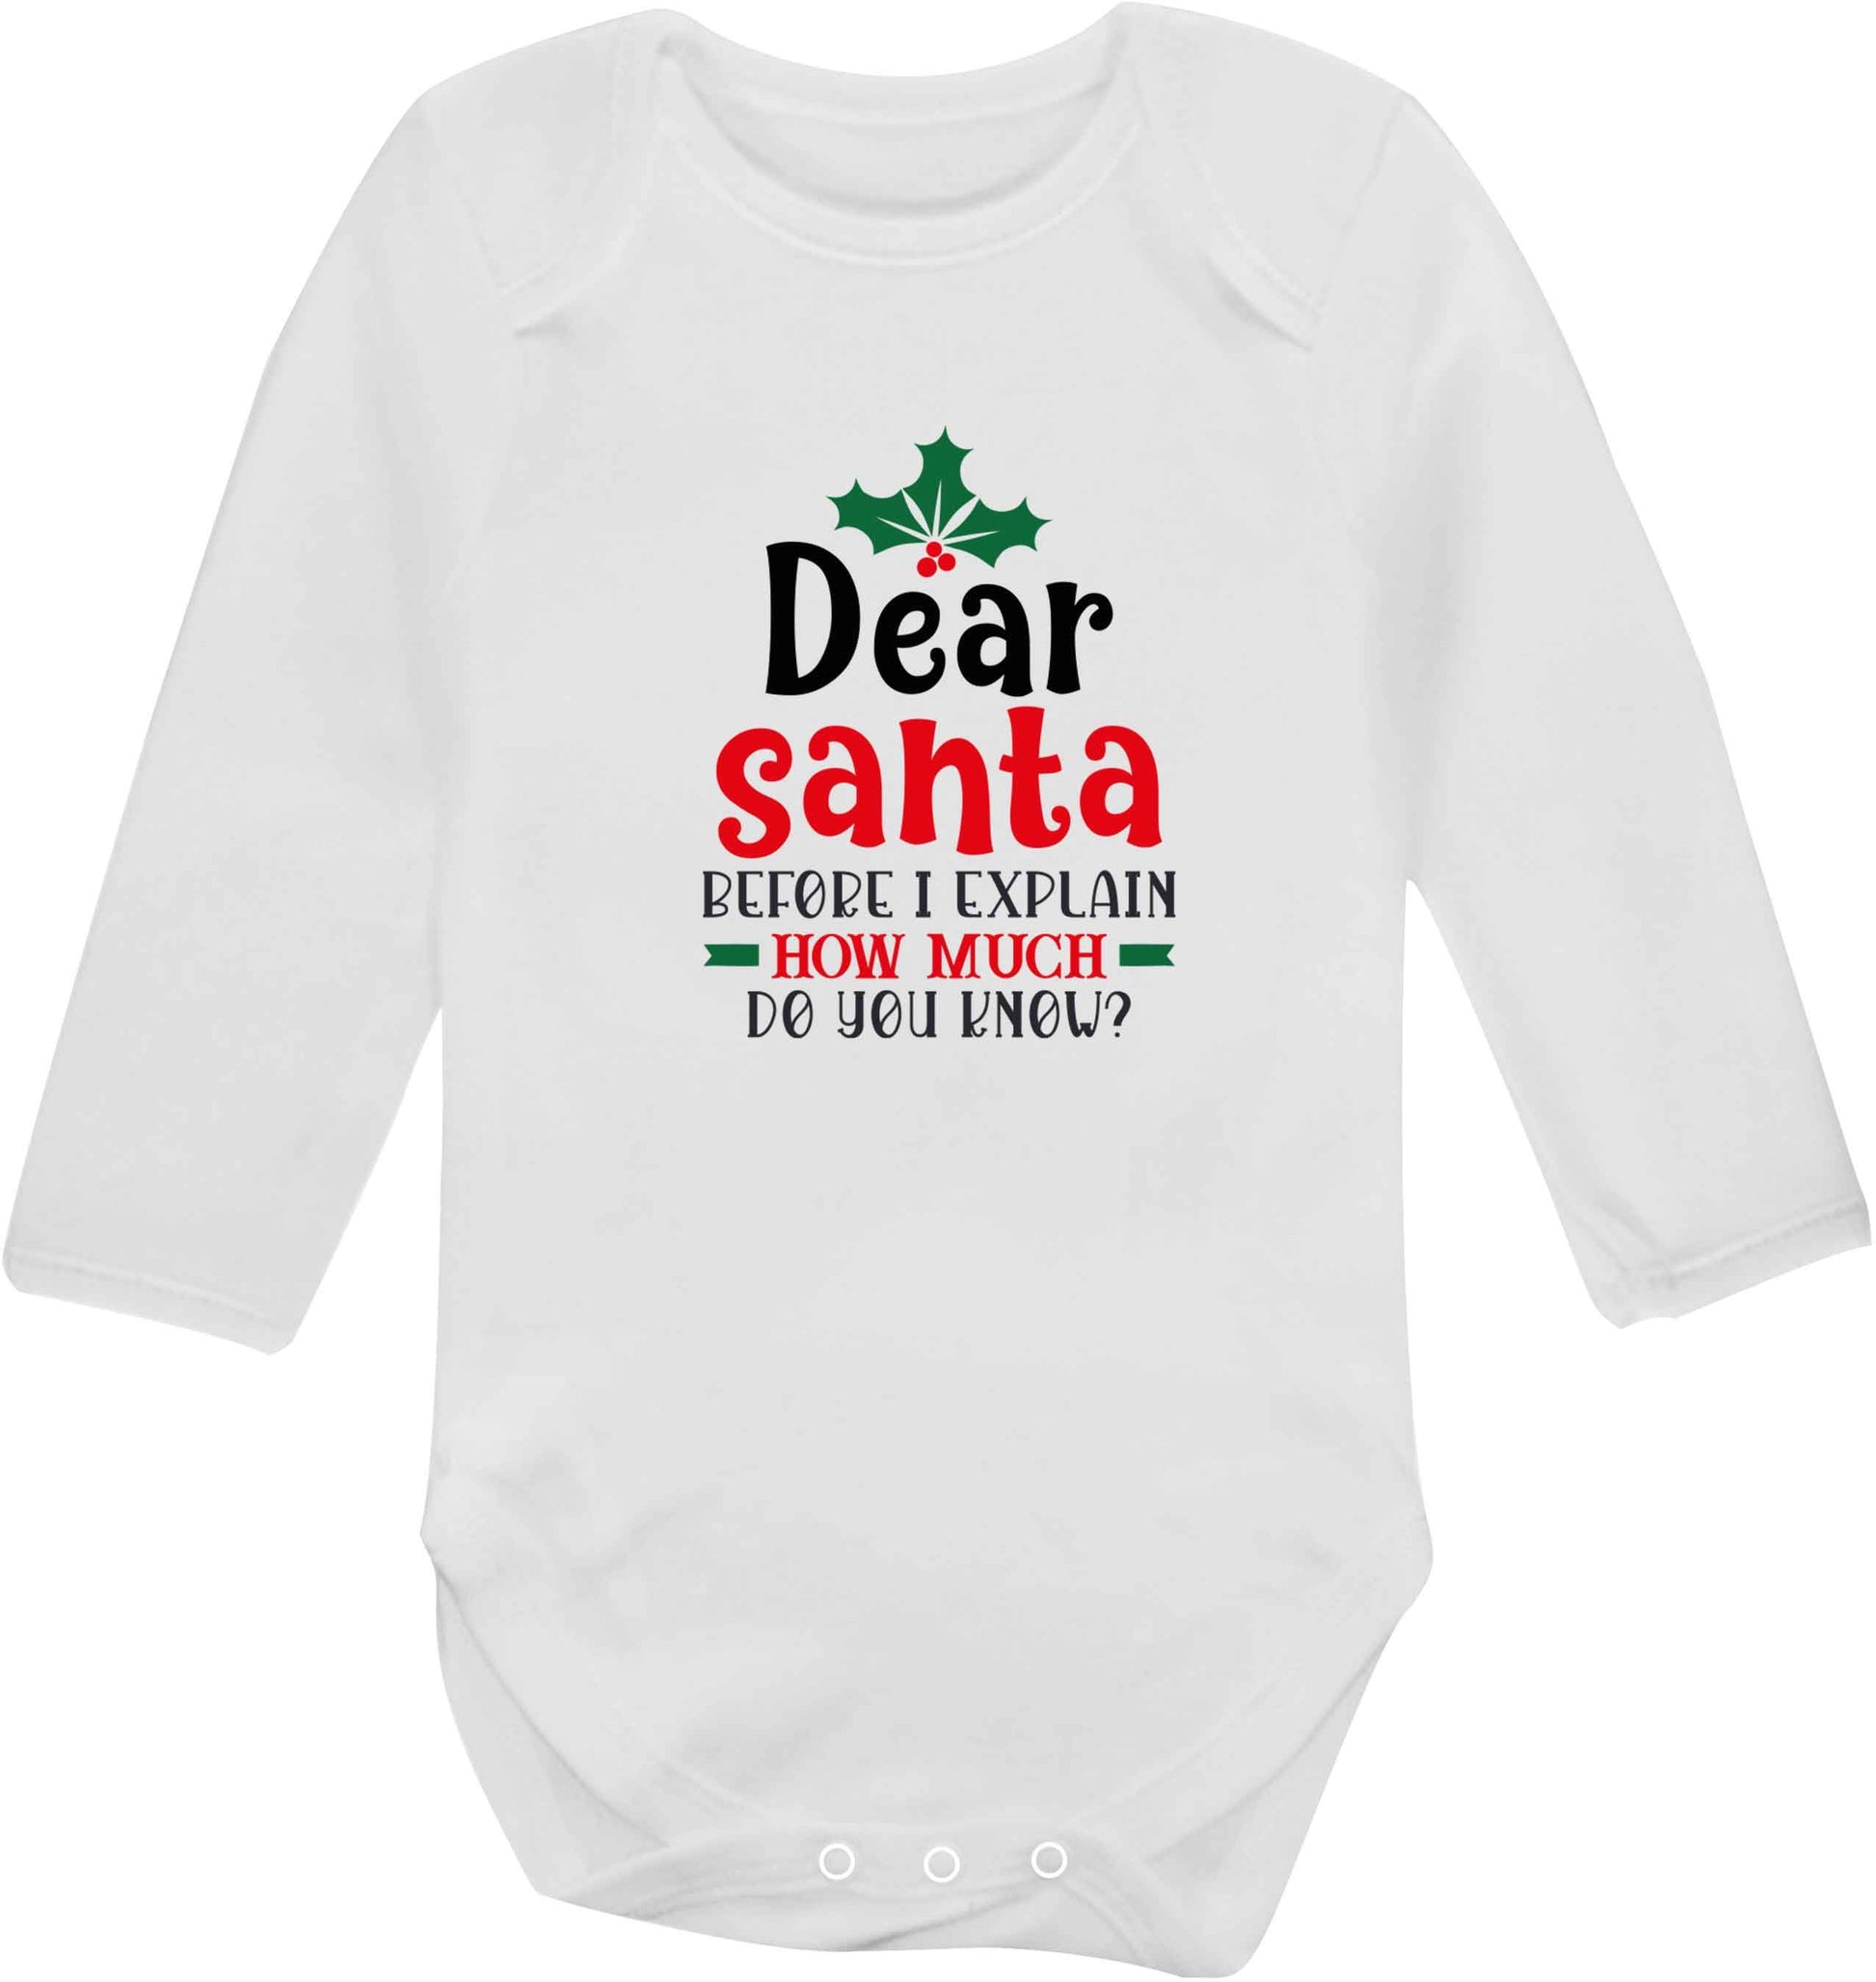 Santa before I explain how much do you know? baby vest long sleeved white 6-12 months